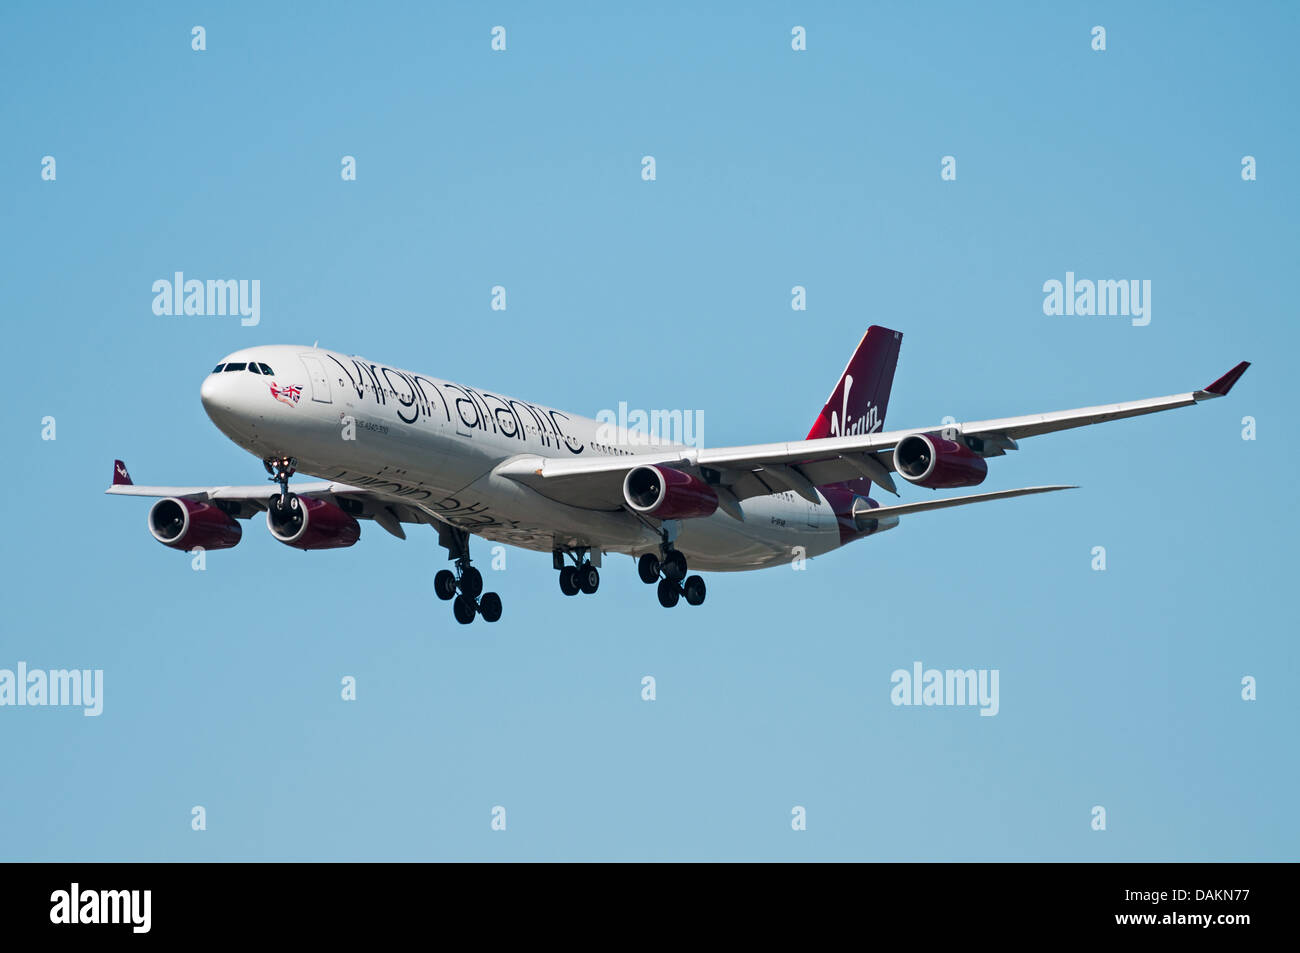 A Virgin Atlantic Airways Airbus A340-300 (313X) in flight and on final approach for landing. Stock Photo